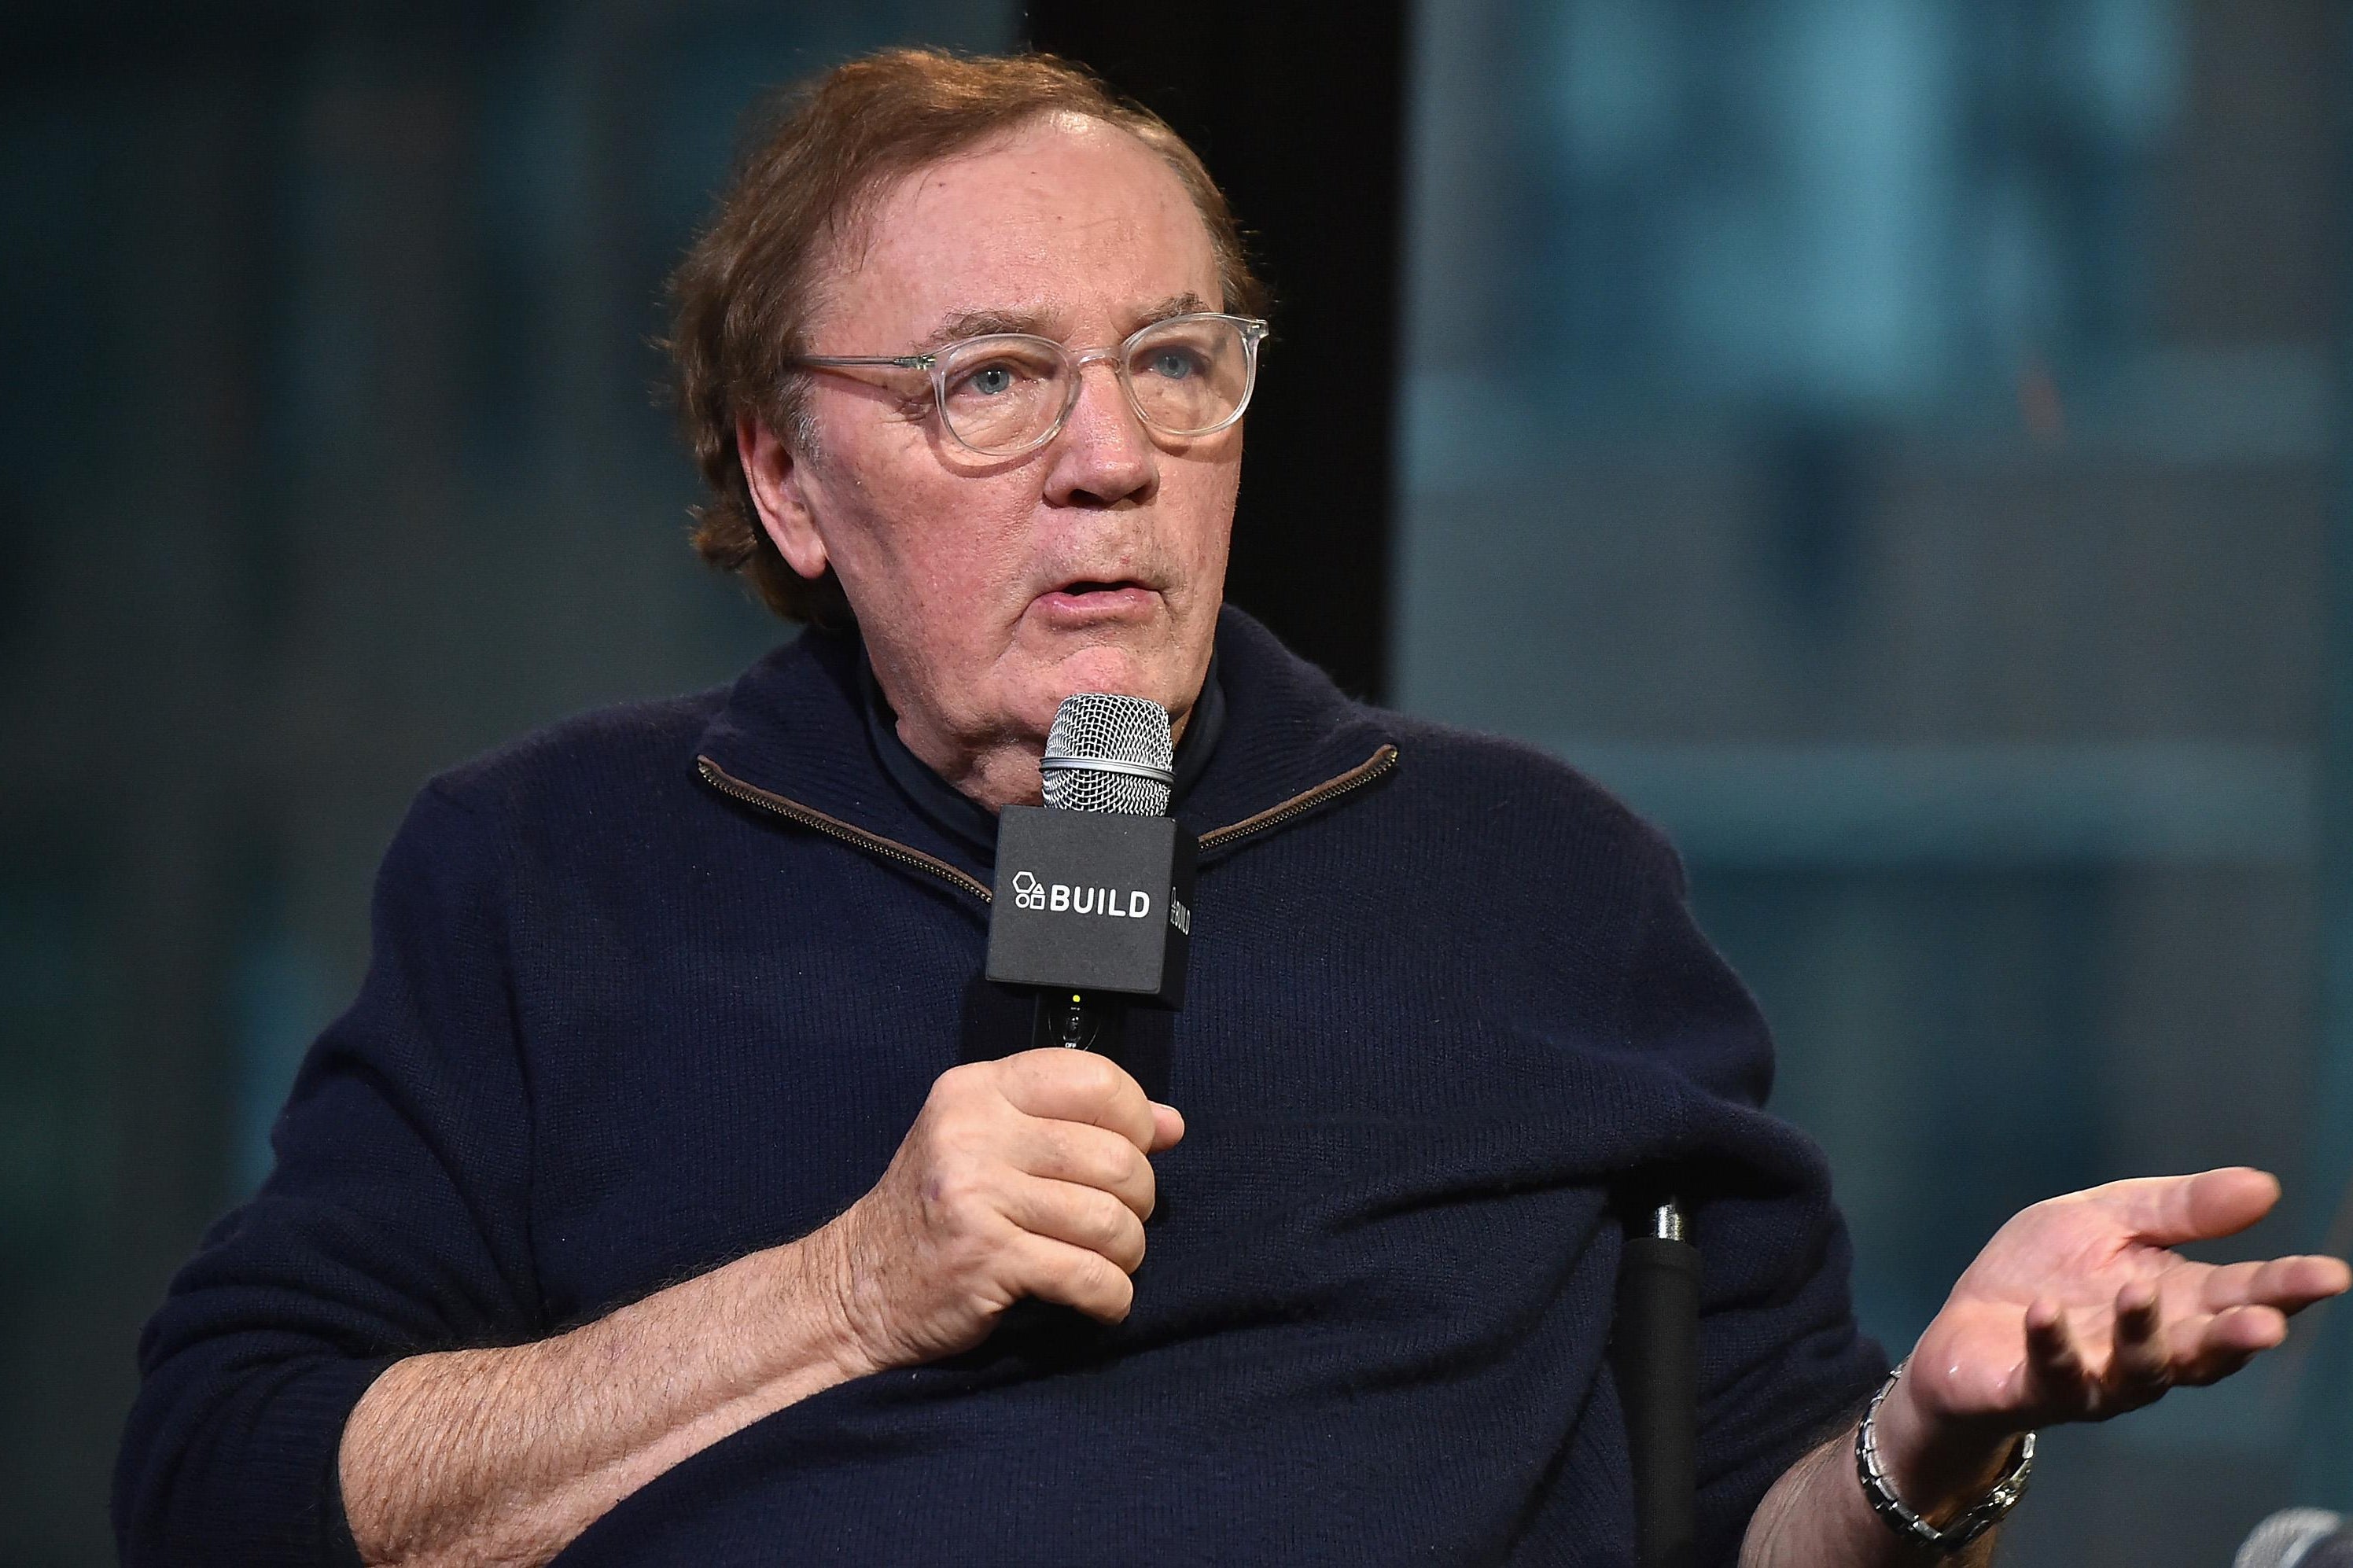 Why Is James Patterson Mad at the New York Times Bestseller List?